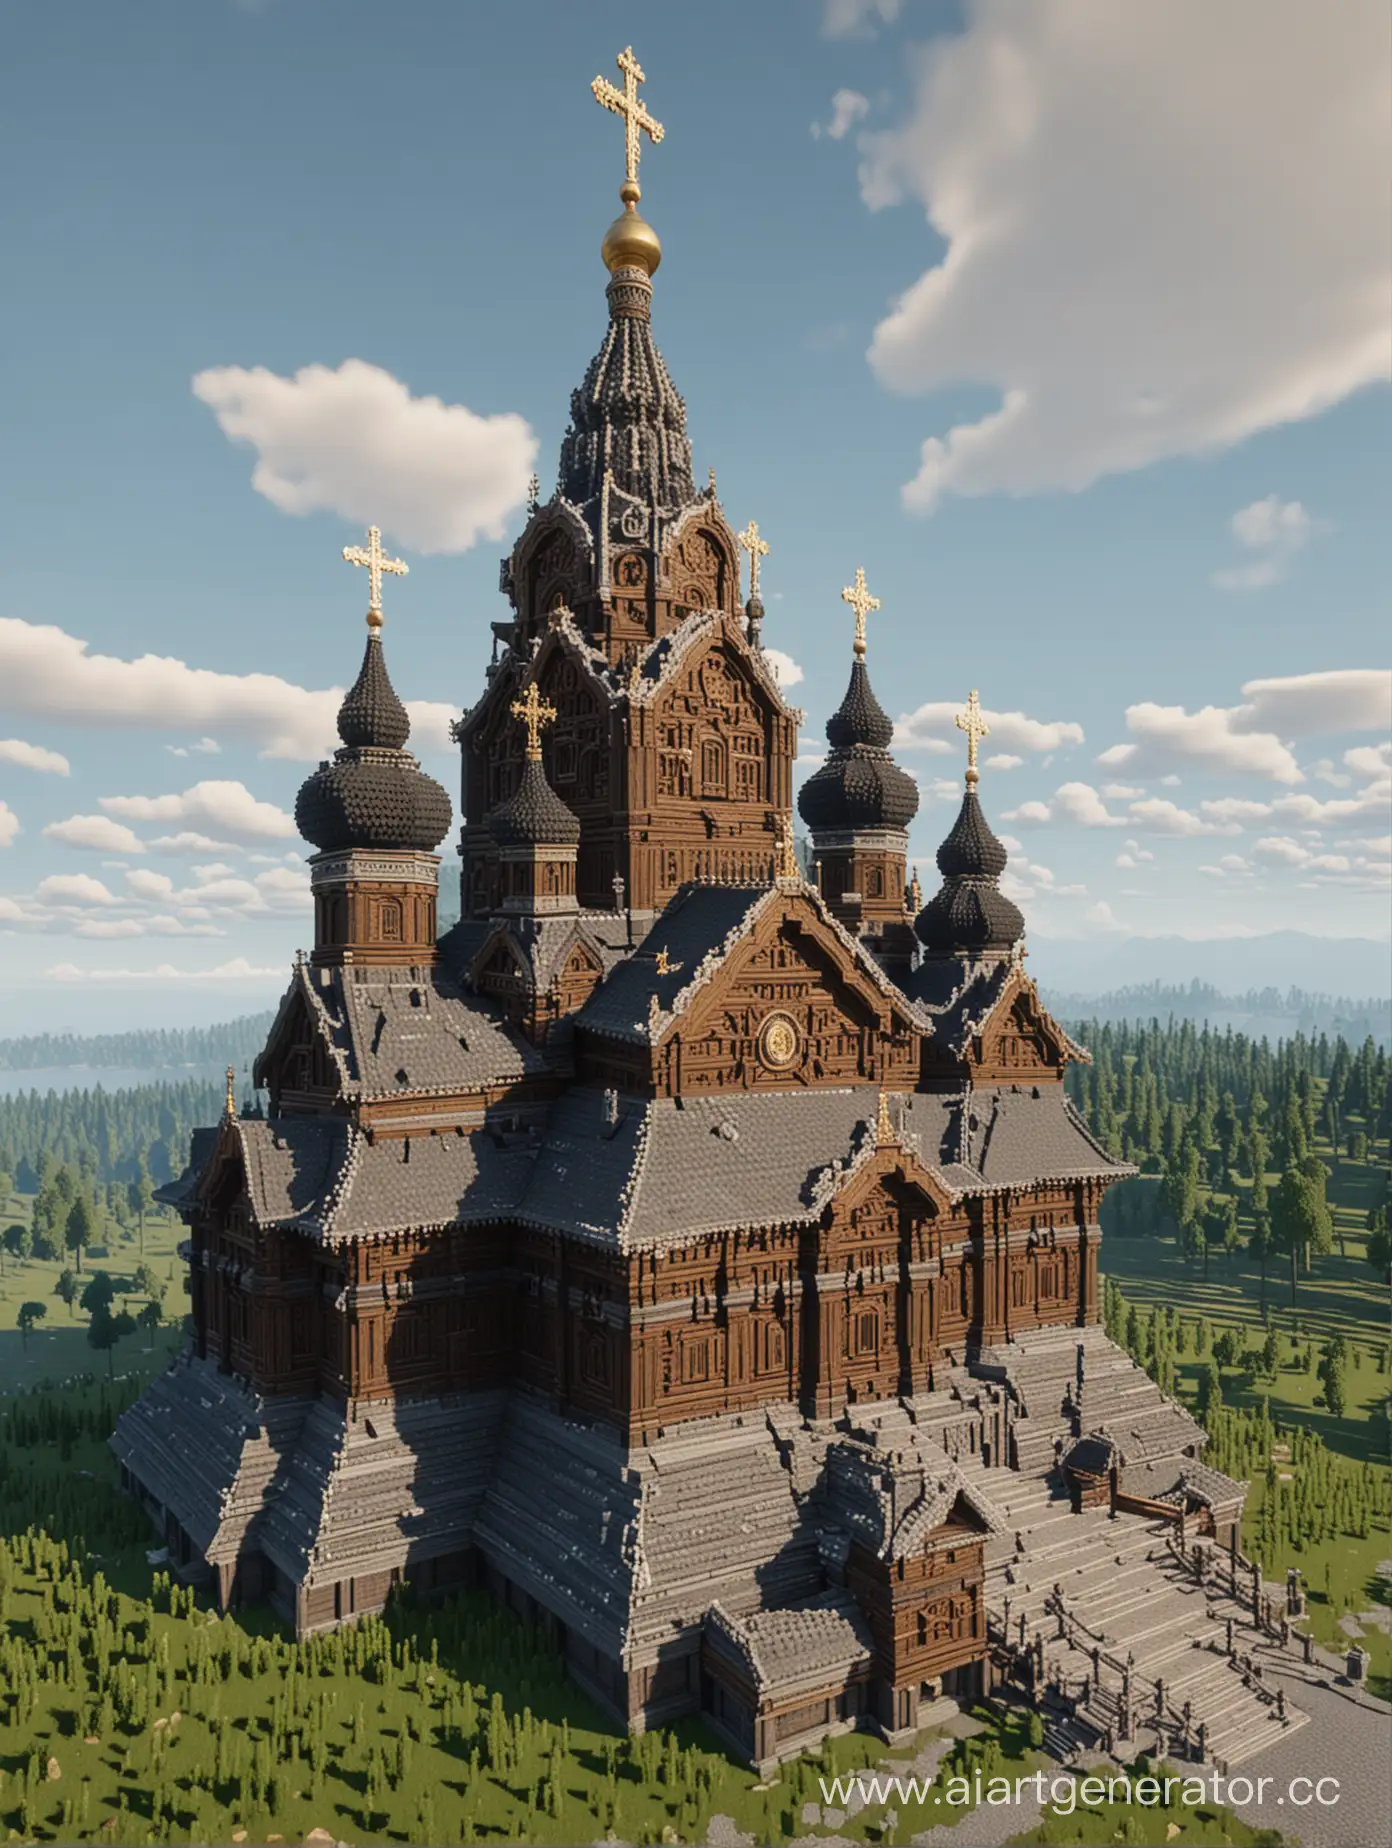 Minecraft-Recreated-Kizhi-Pogost-Church-with-Detailed-Architecture